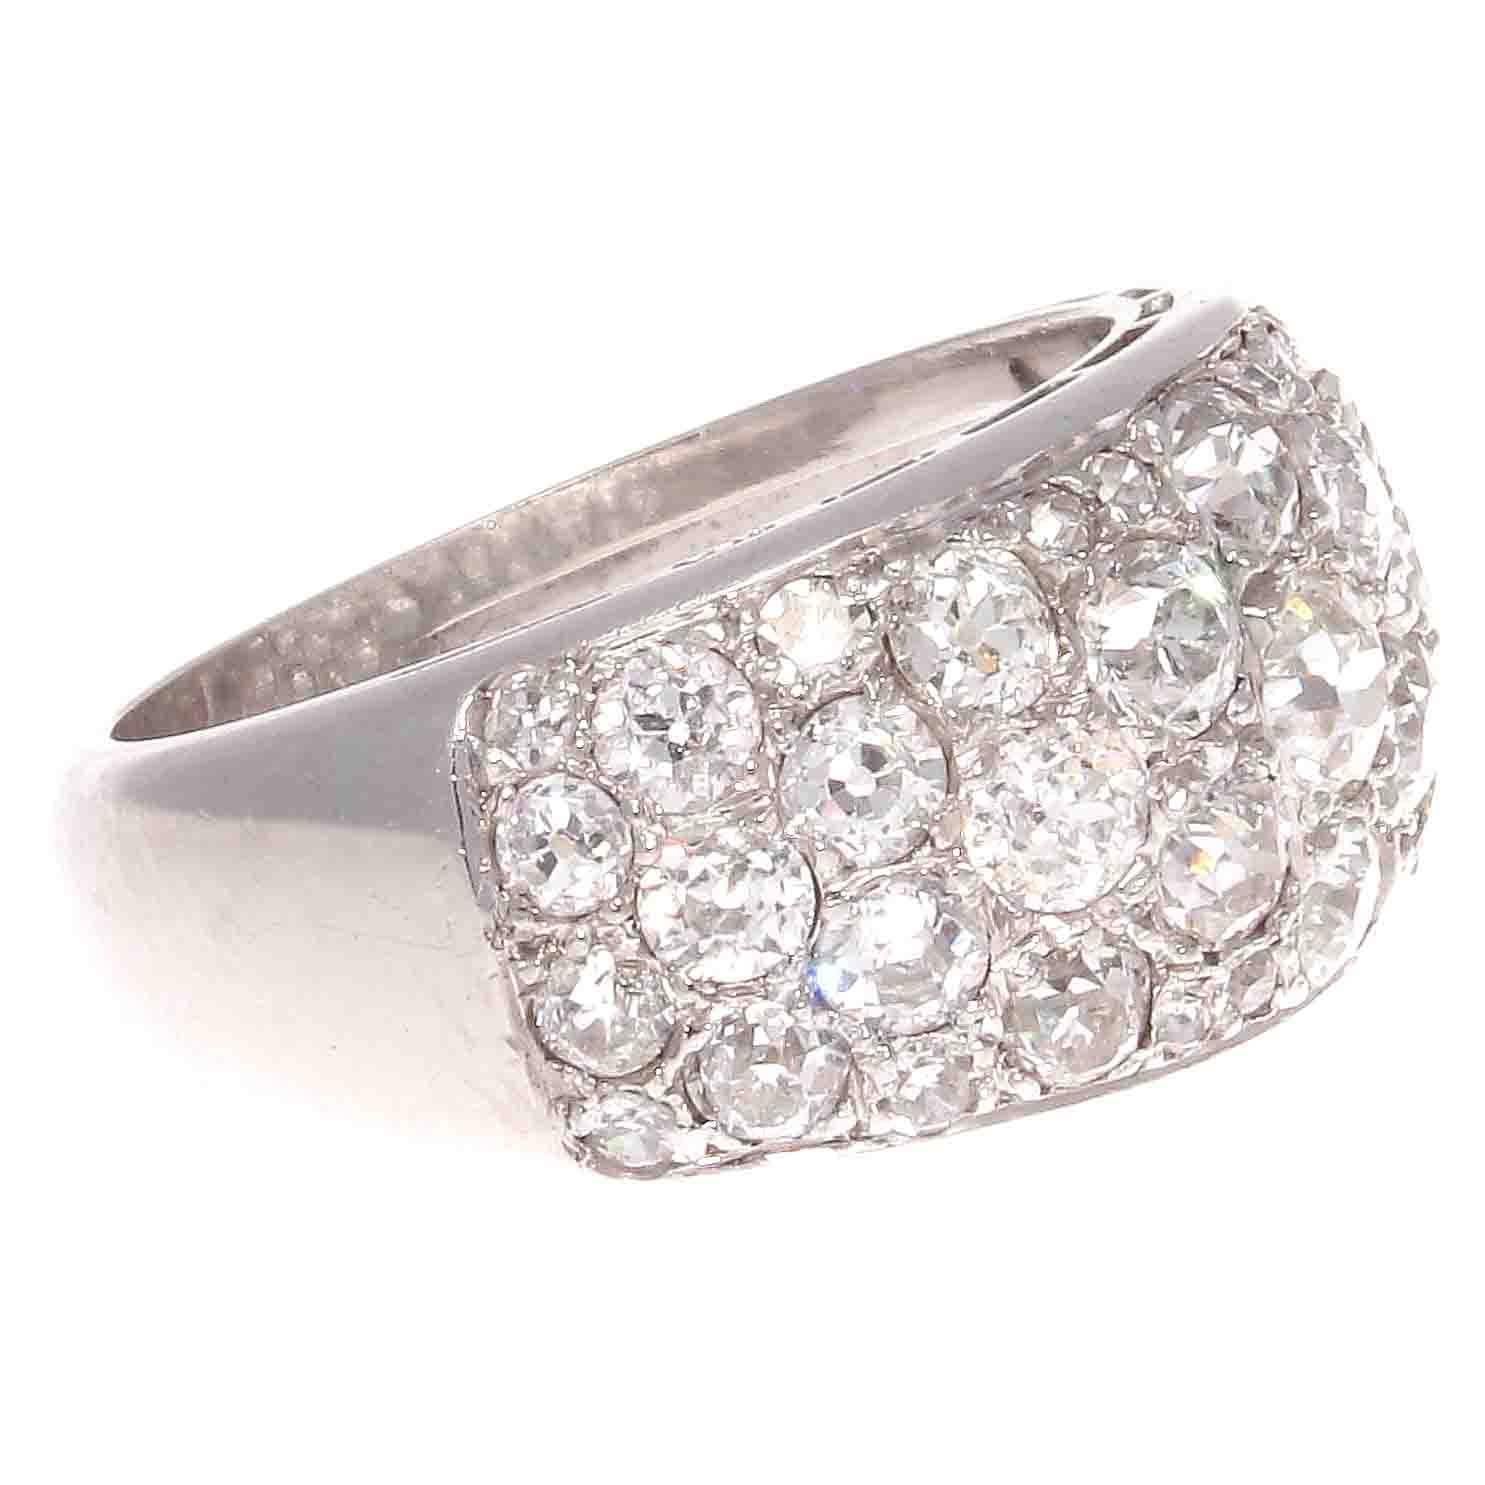 True elegance through pure design. Featuring an array of old European cut diamonds weighing approximately 3.50 carats that are G-H color, SI+ clarity. All expertly embedded in the hand crafted platinum ring.

Ring size 8-1/2 and can easily be